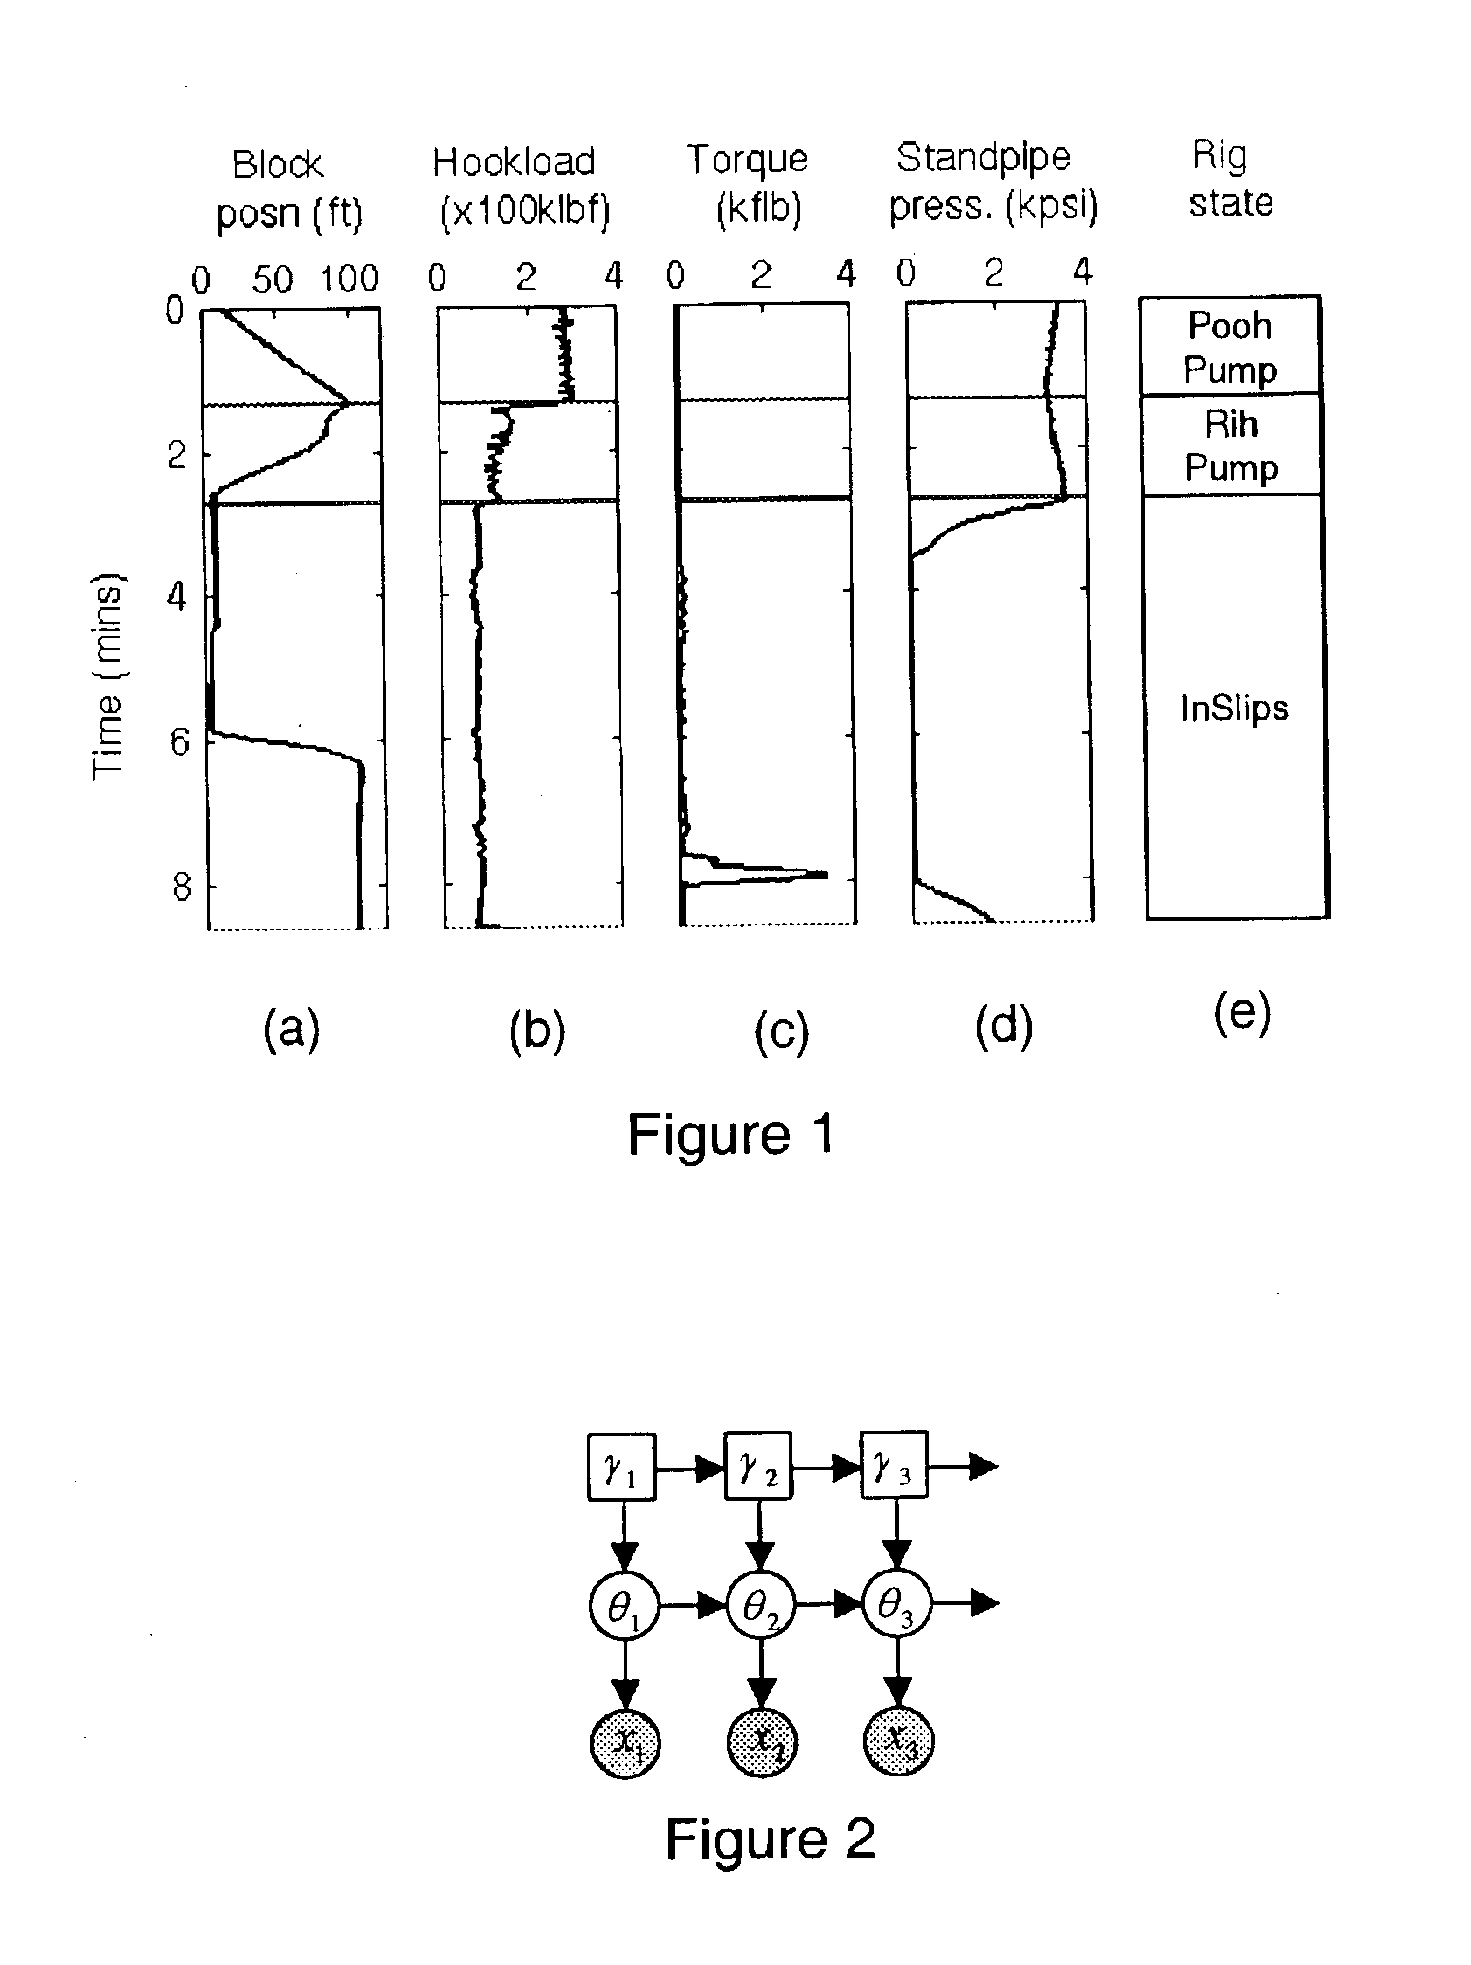 Methods and systems for averting or mitigating undesirable drilling events